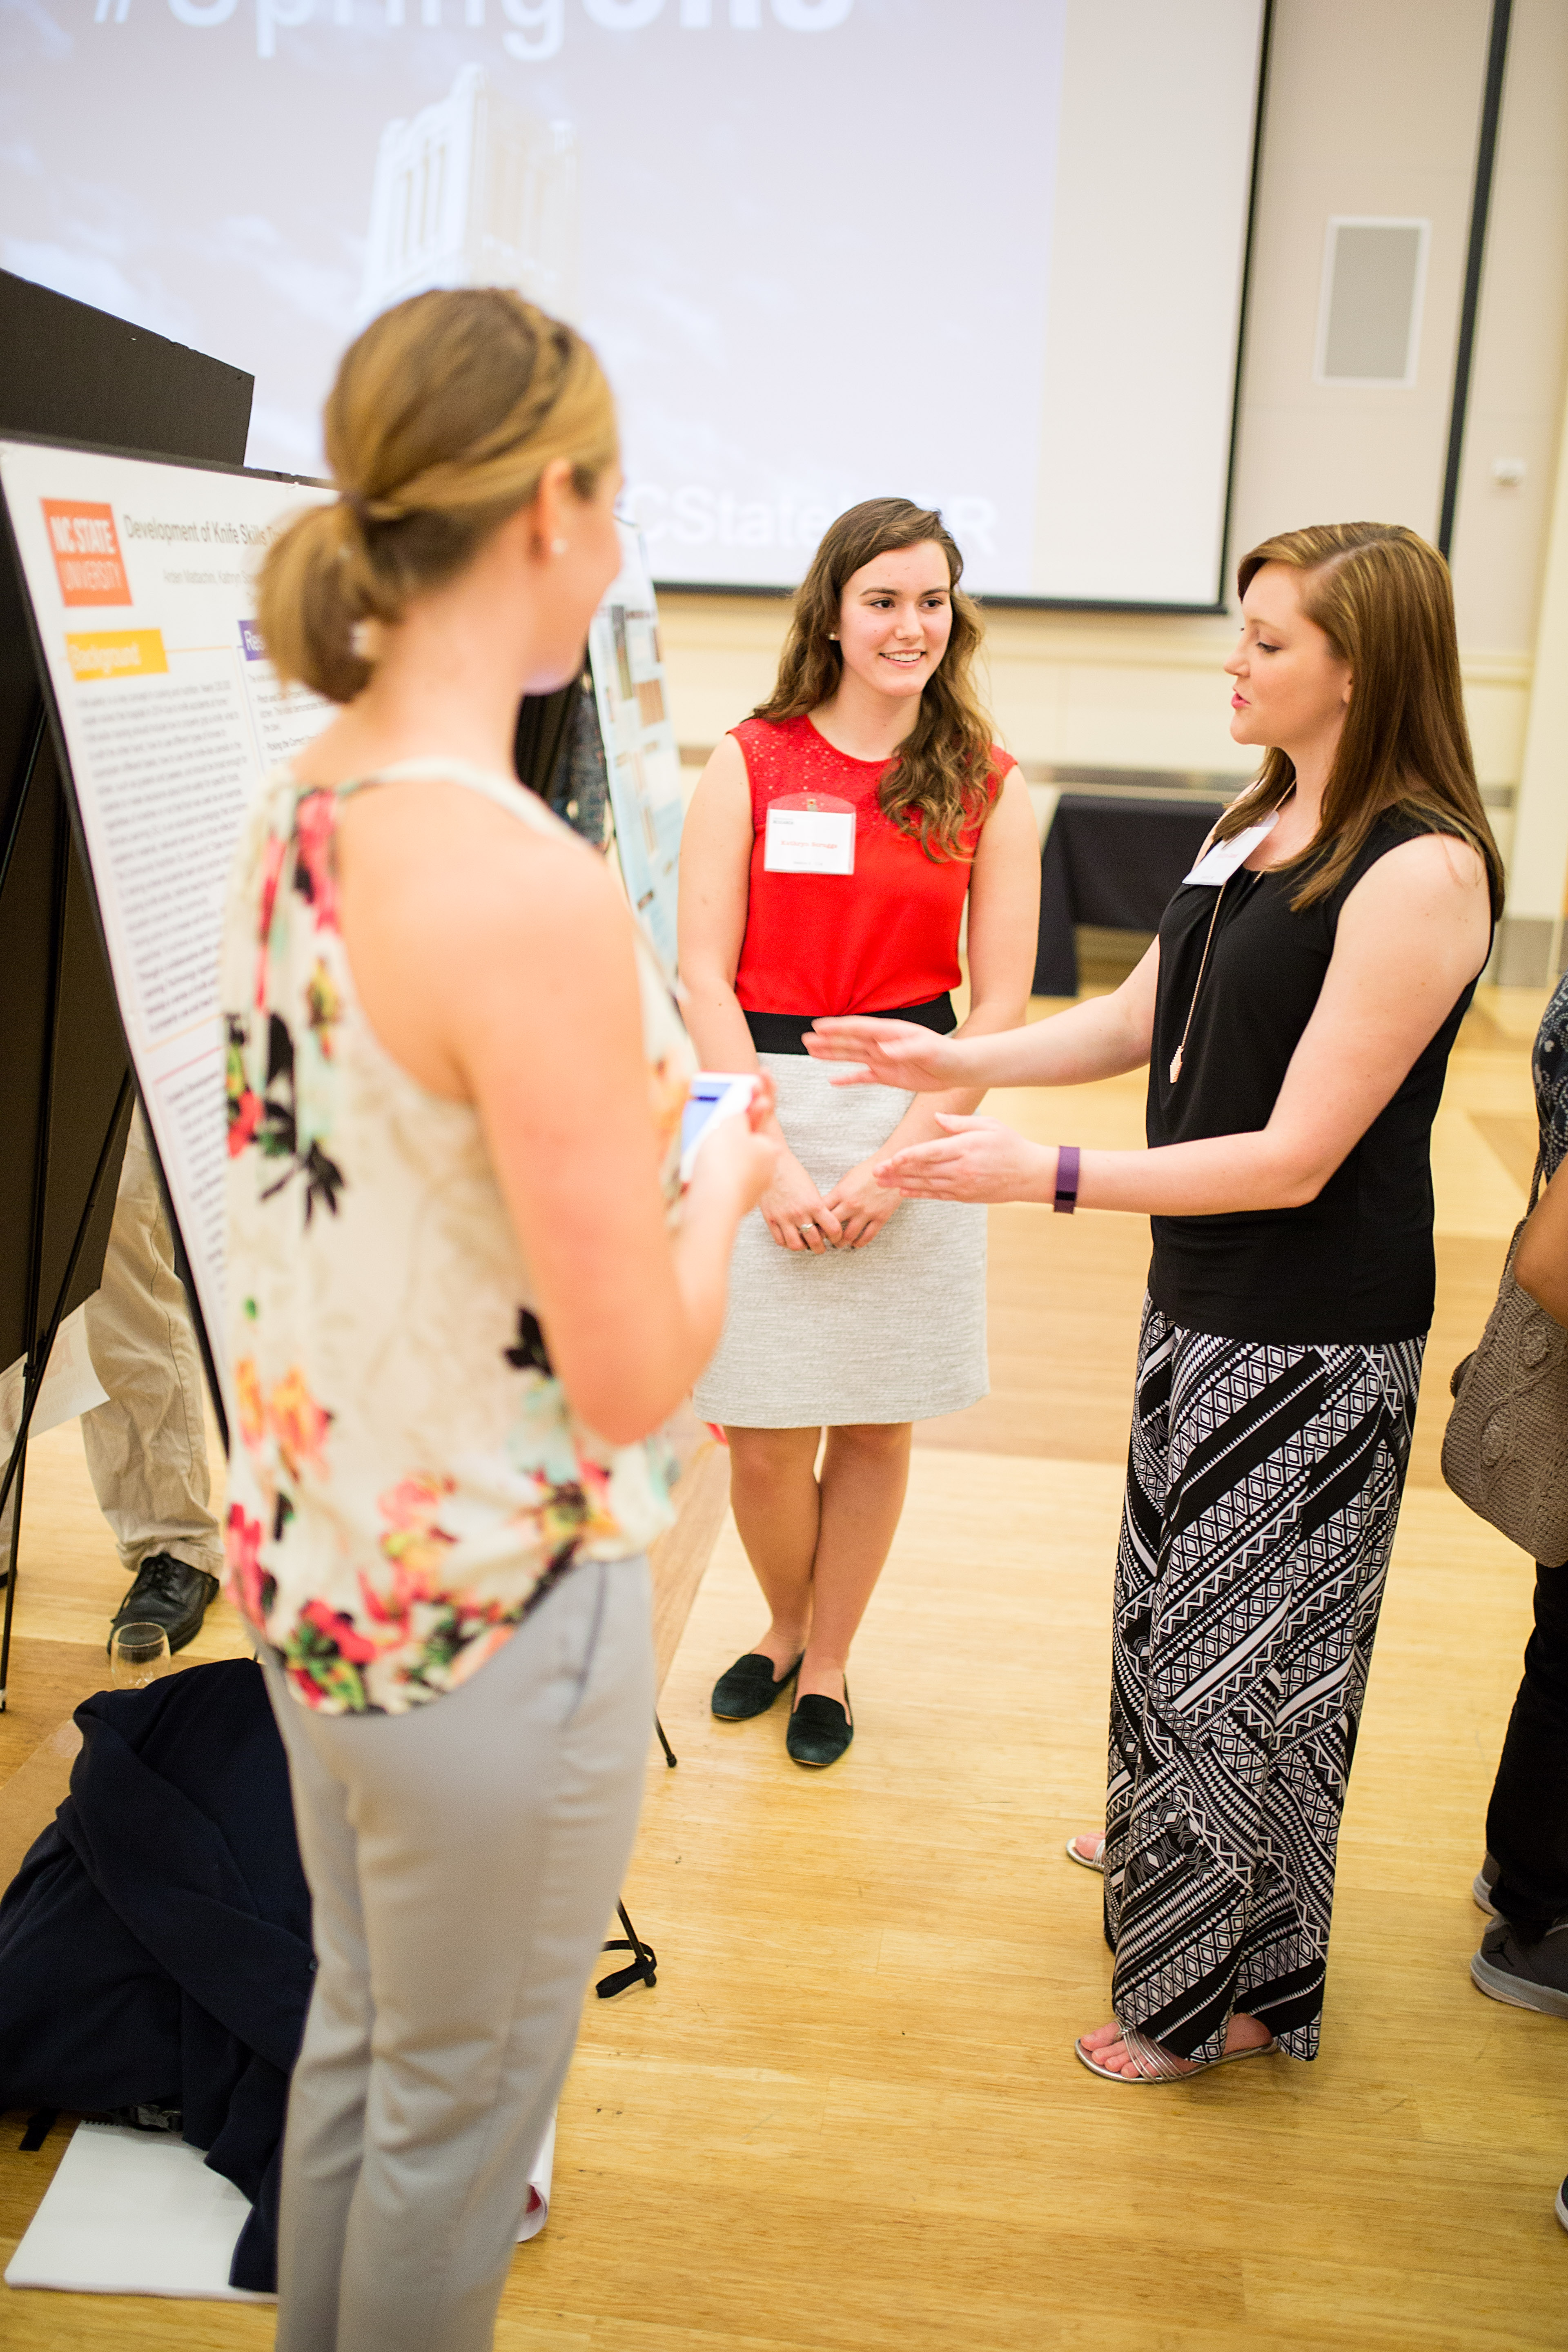 From left to right: Arden Mattachini and Kati Scruggs discuss the importance of knife safety with poster visitor.